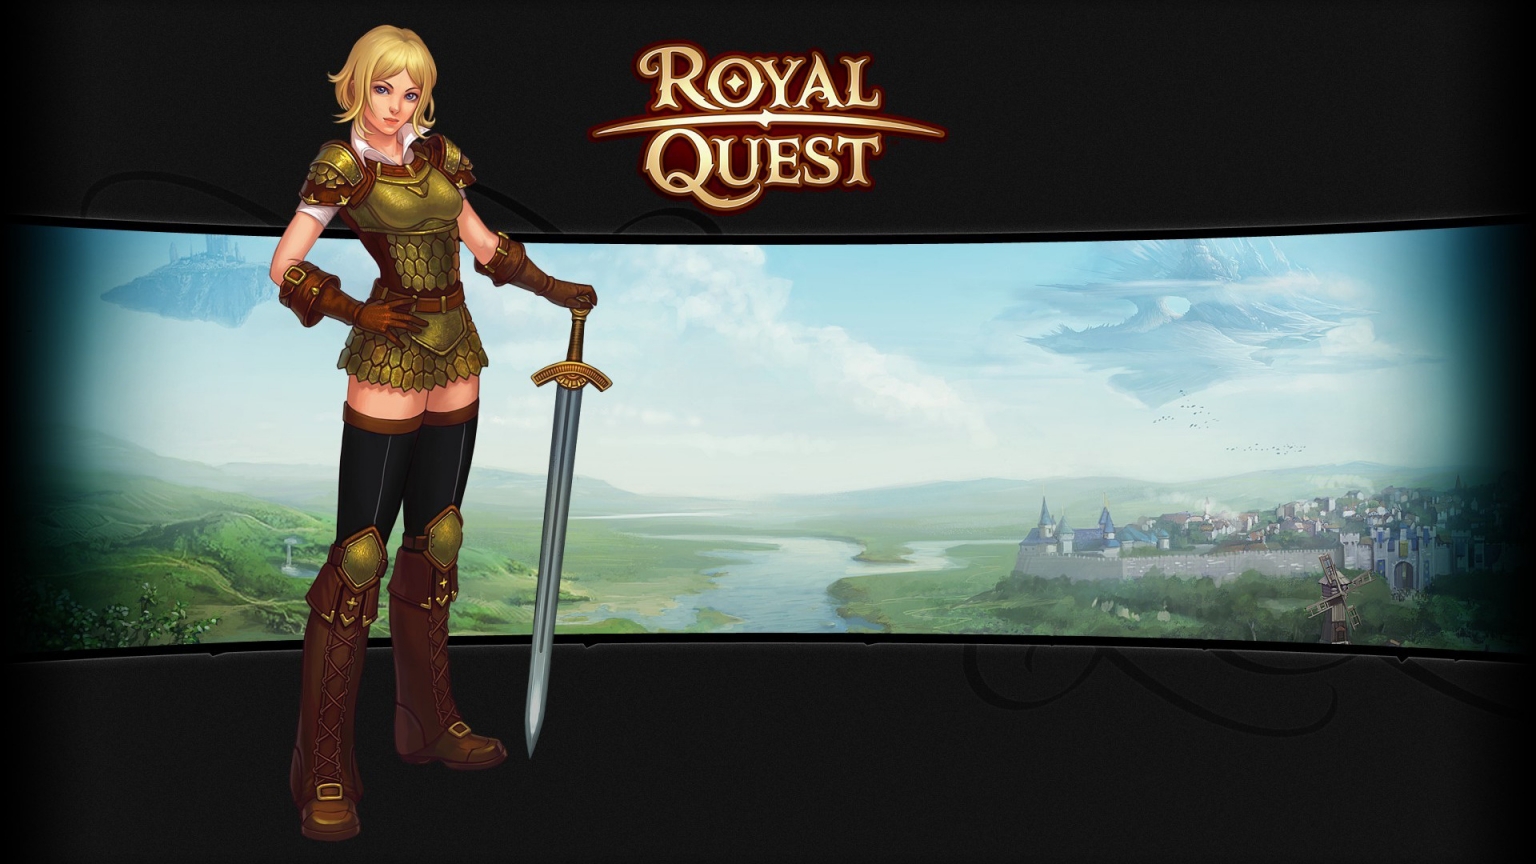 Royal Quest for 1536 x 864 HDTV resolution